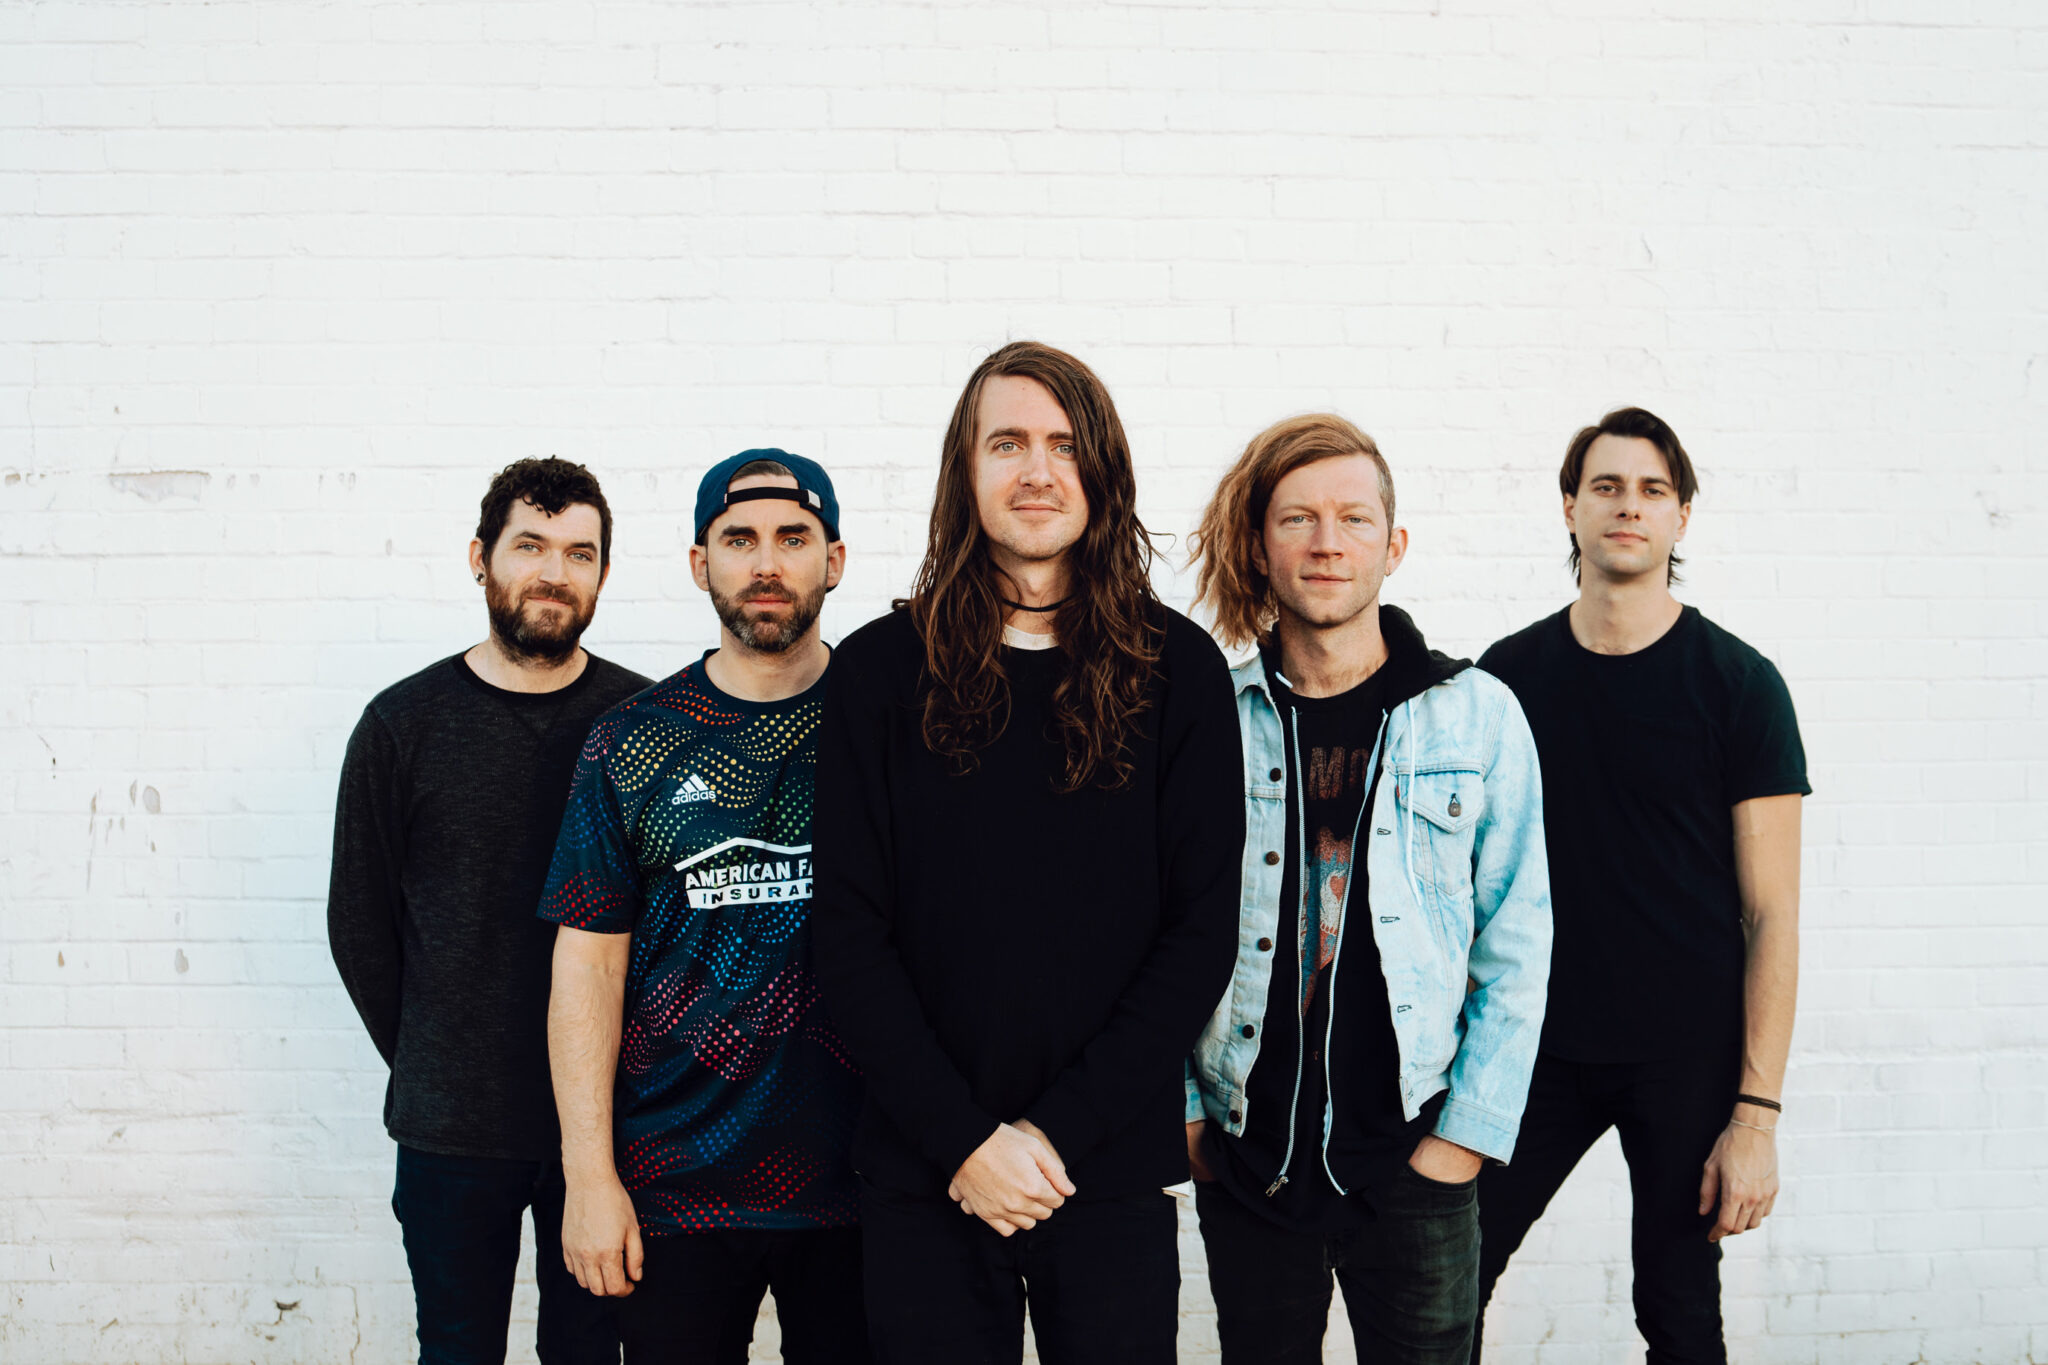 MAYDAY PARADE COVER “I WANT TO HOLD YOUR HAND” WITH WE THE KINGS, THE MAINE, AND MORE